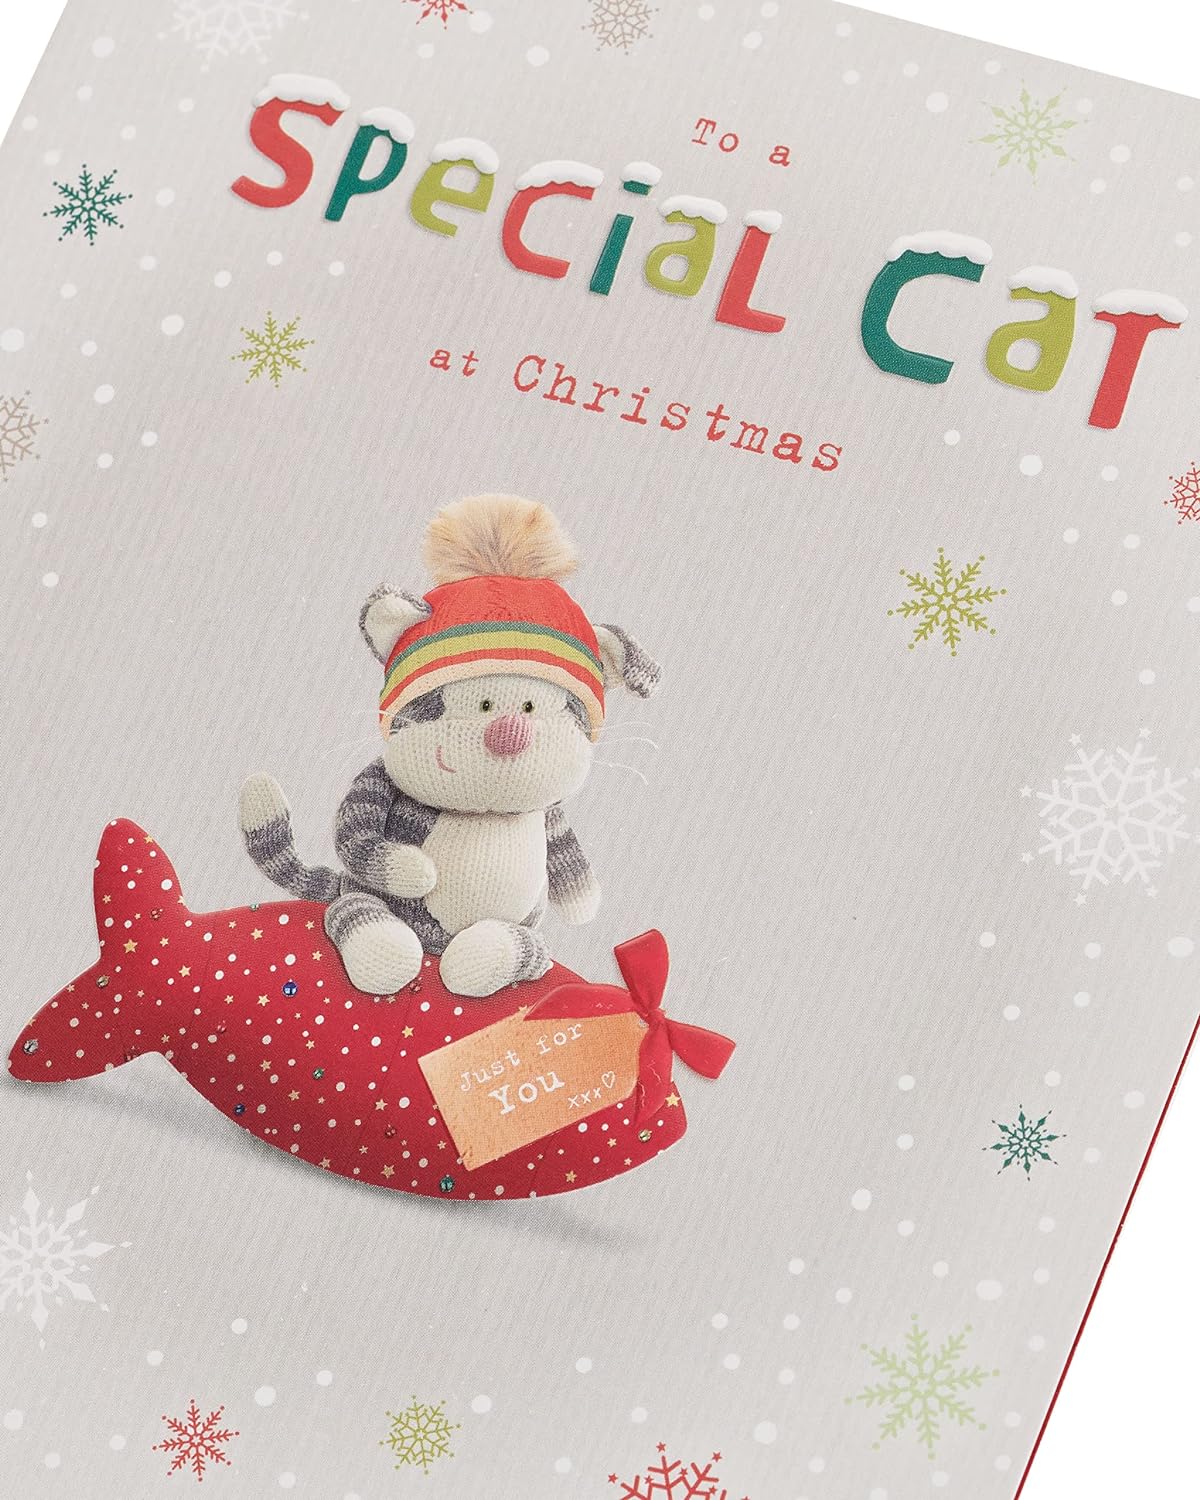 Boofle Cute Design For The Cat Christmas Card